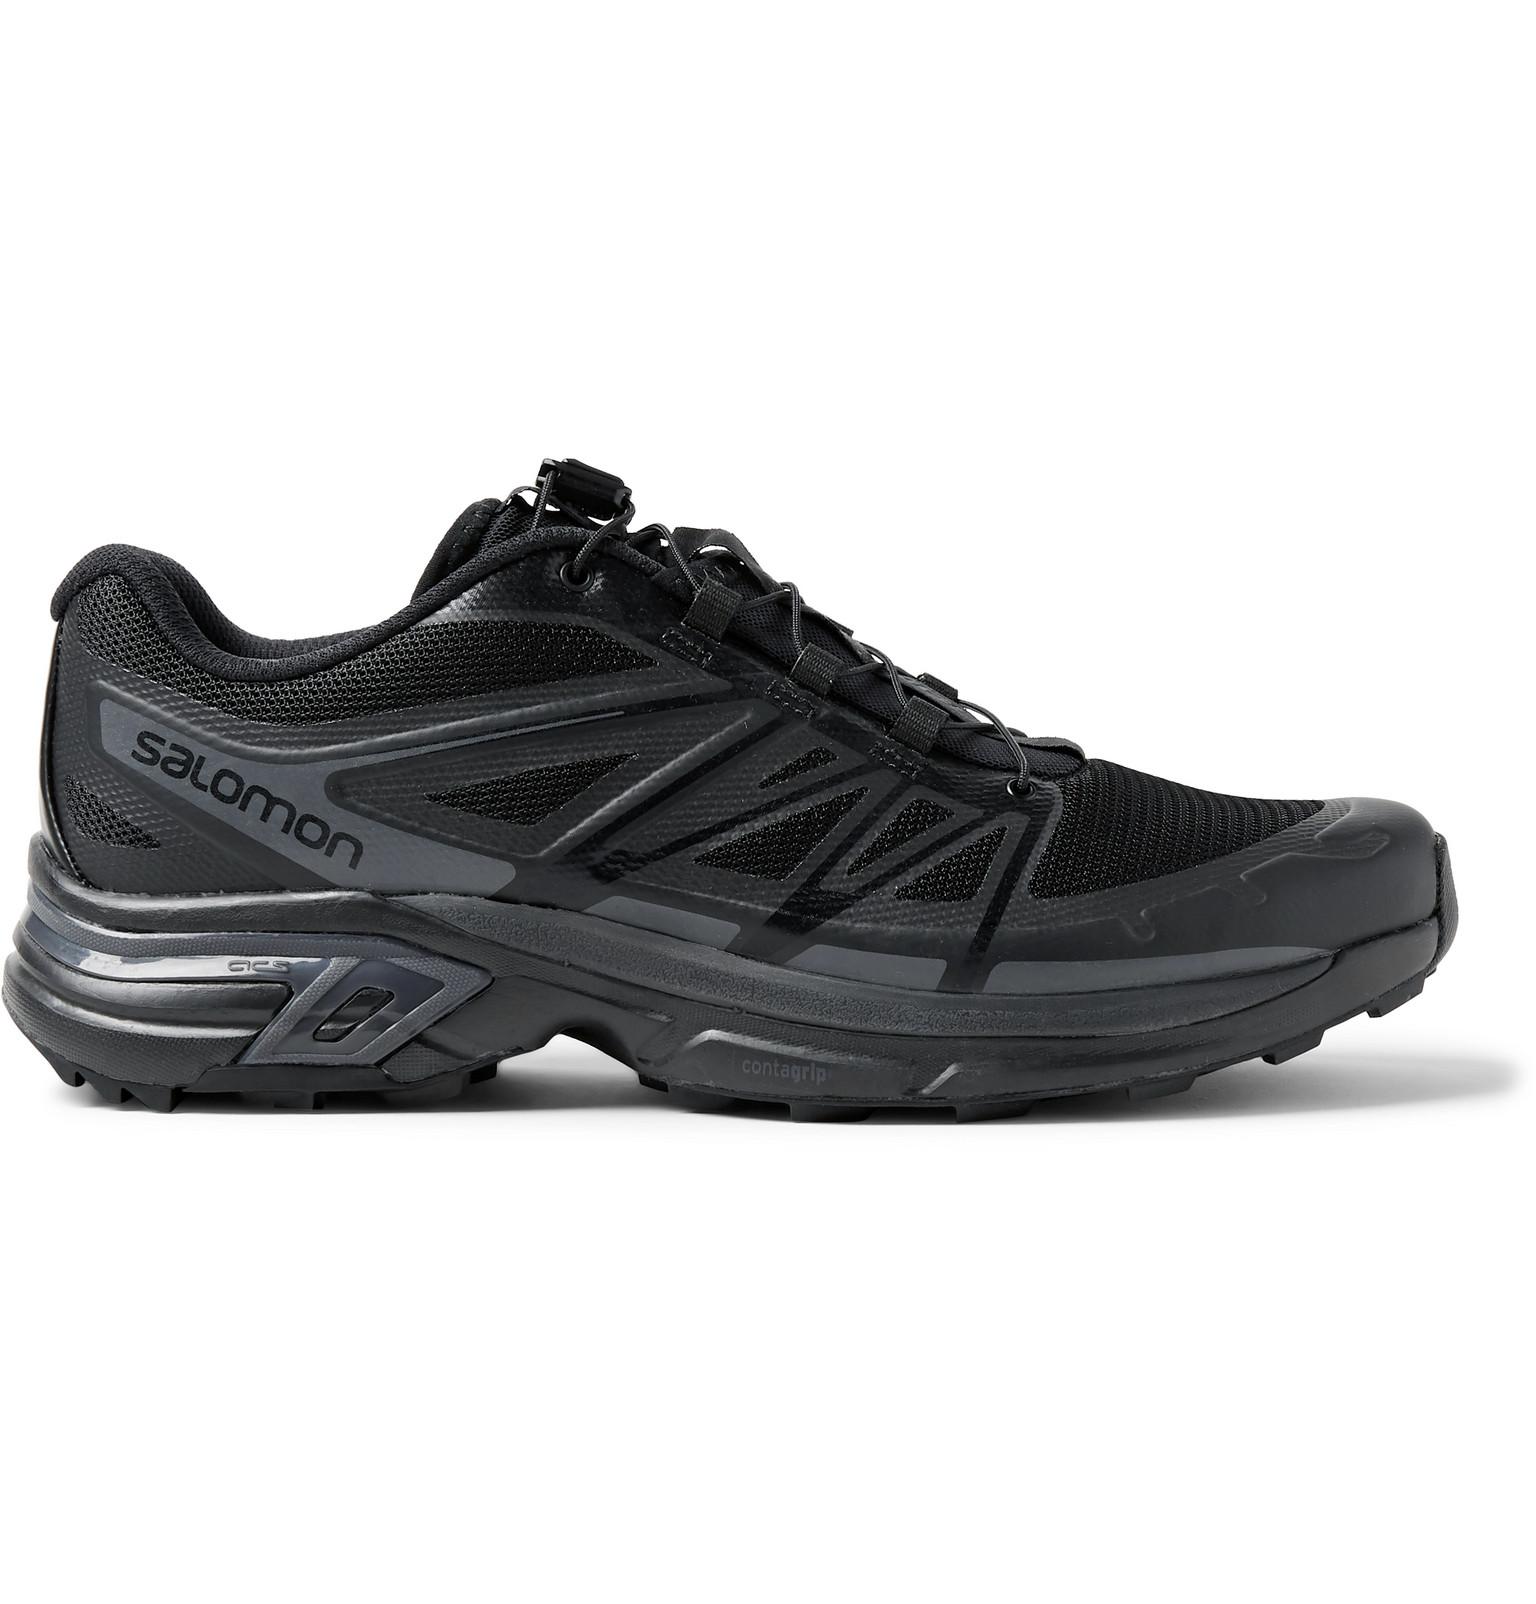 Salomon Xt-wings 2 Adv Mesh And Rubber Running Shoes in Black for Men - Lyst